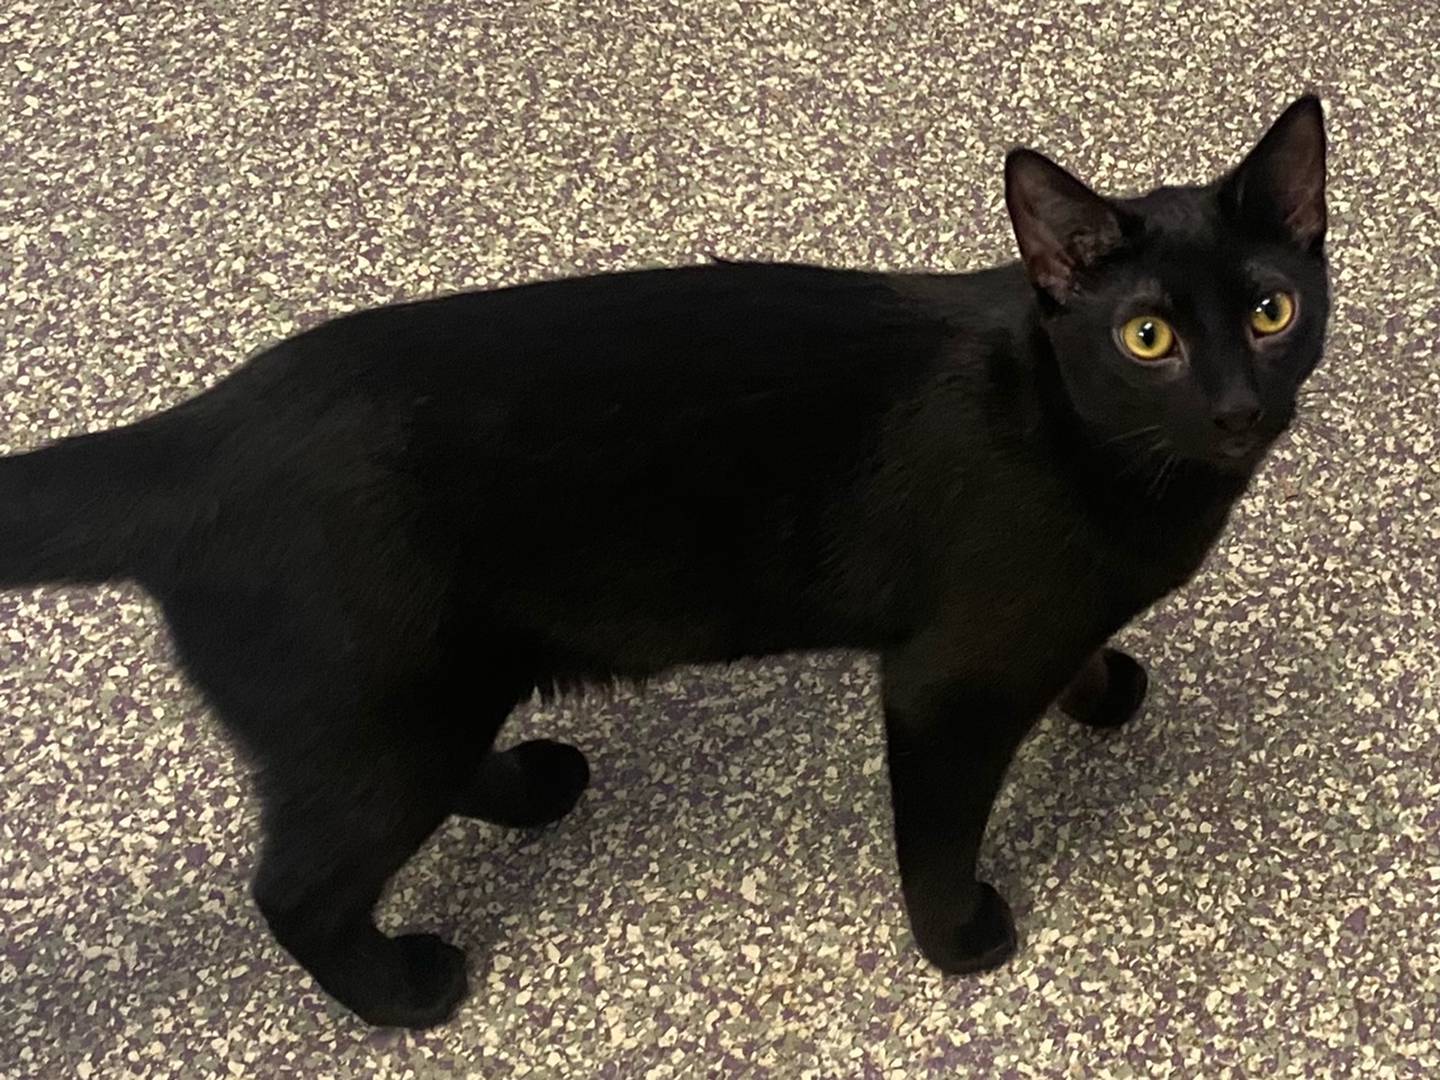 Jafar is a 1-year-old domestic shorthair. He is shy upon first meeting, but quickly turns playful. Jafar would make a great addition to any family. For more information on Jafar, including adoption fees please visit justanimals.org or call 815-448-2510.